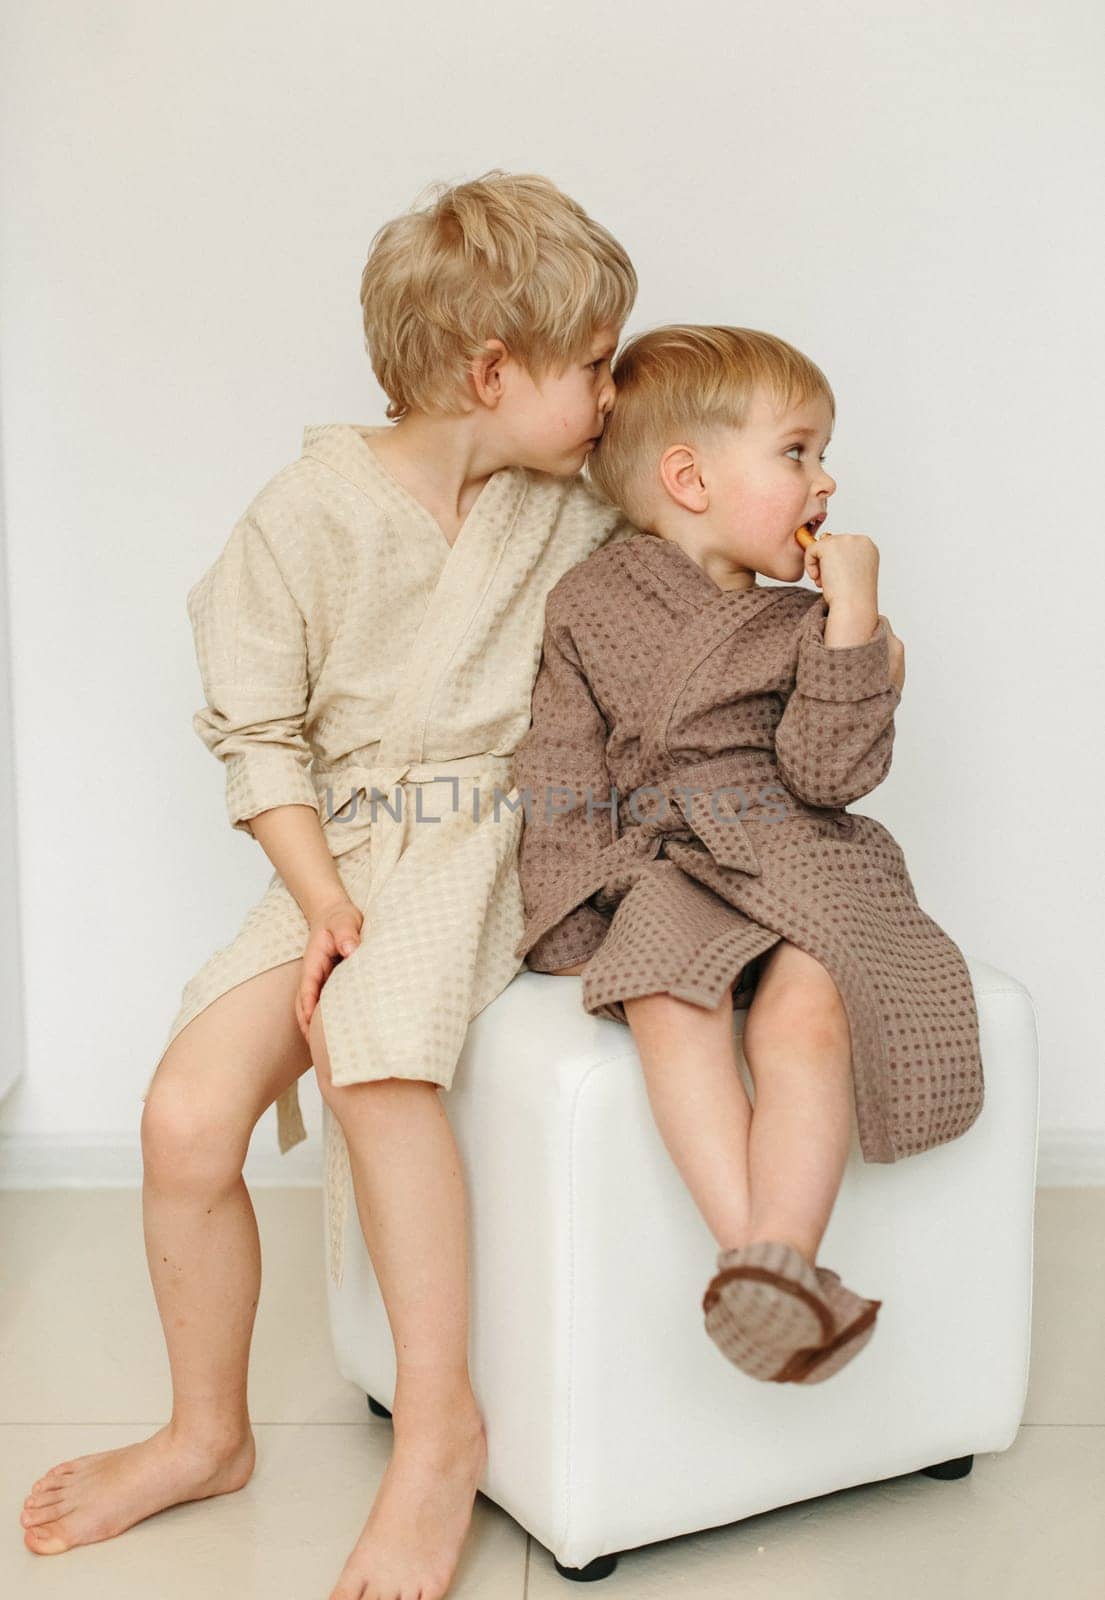 Two boys in bathrobes are sitting on a pouf in a white room. The elder kisses the younger on the back of the head.